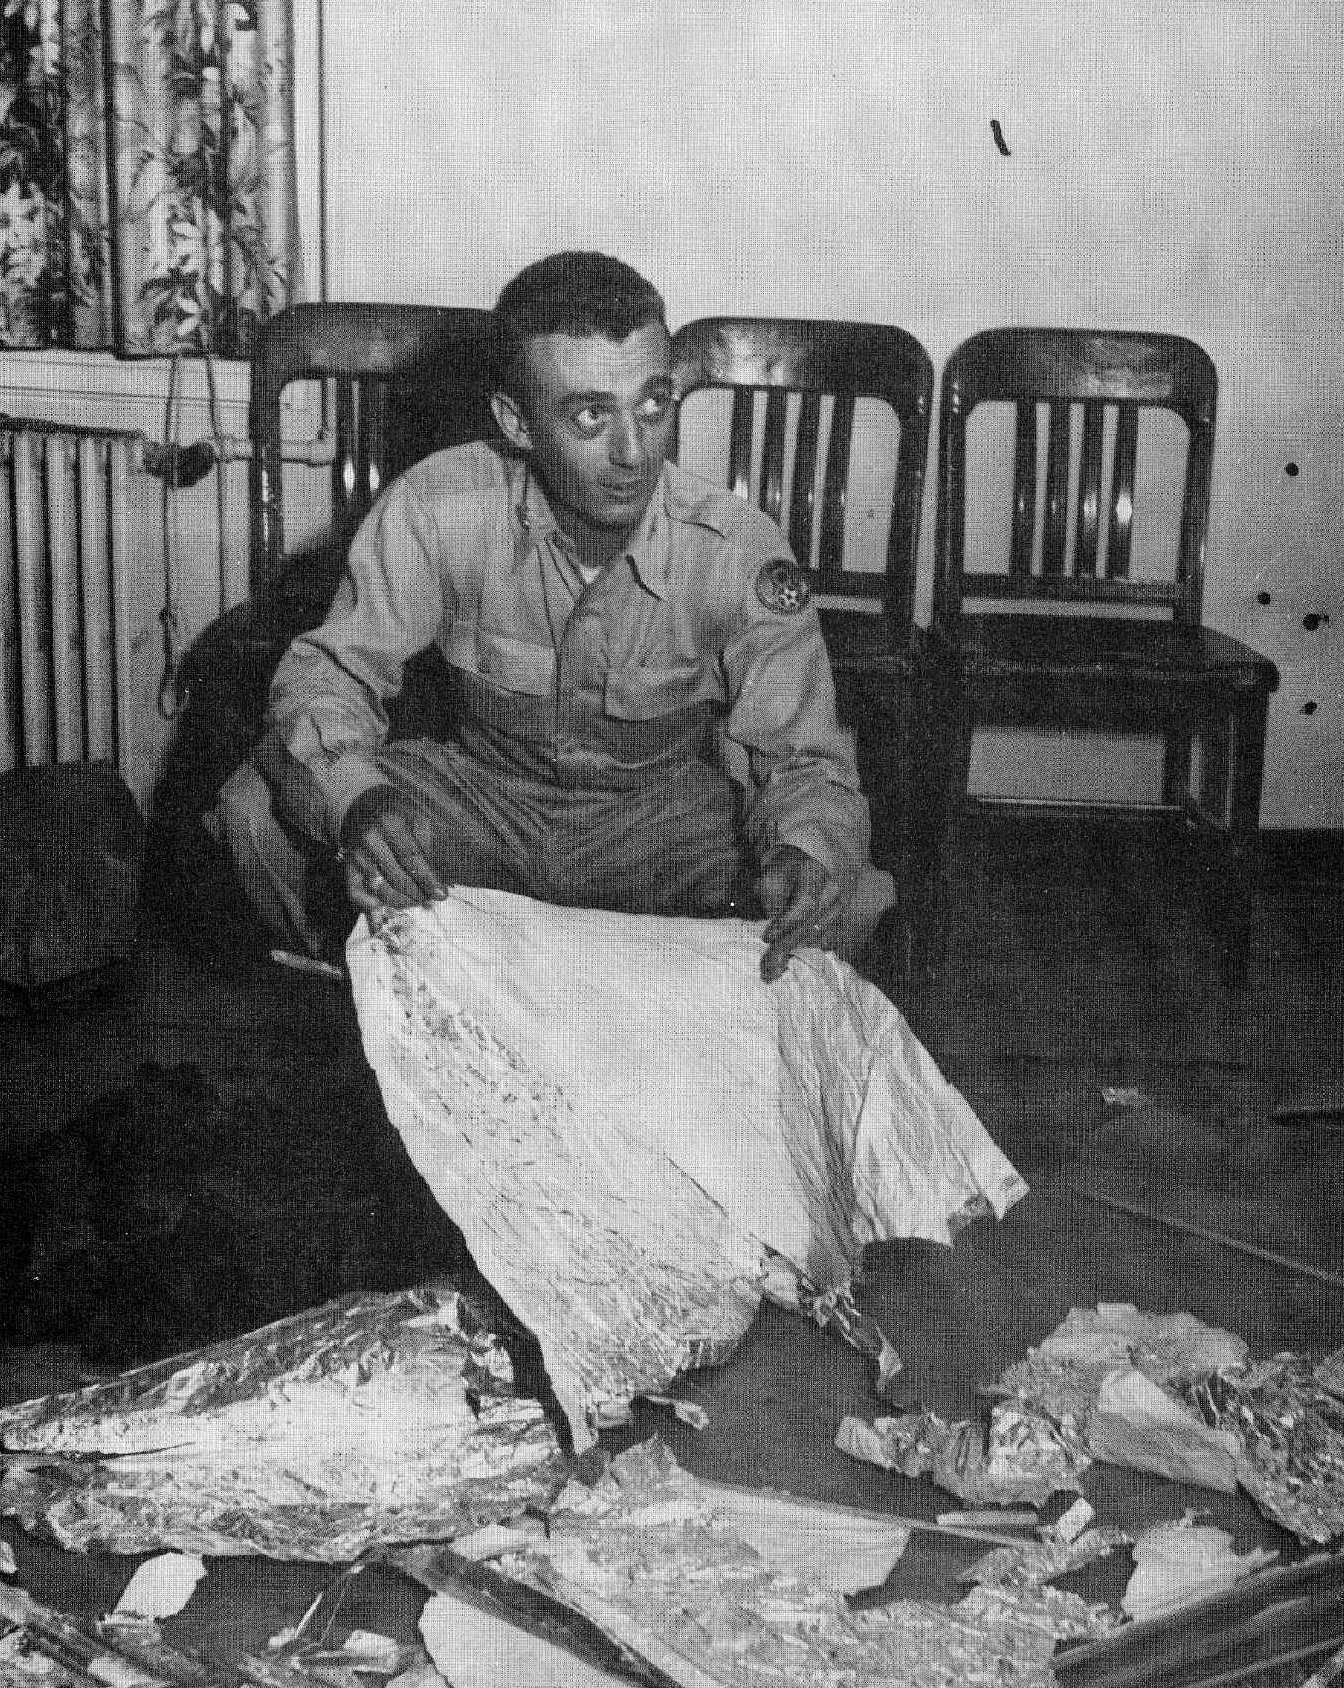 Fig. 10 - Major Jesse Marcel, Sr., the Chief Intelligence Officer at    the Roswell Army Air Force Base in 1947. Marcel claims that he was ordered to pose with bogus baloon debris so that    the incident would become a laughingstock s13USAF